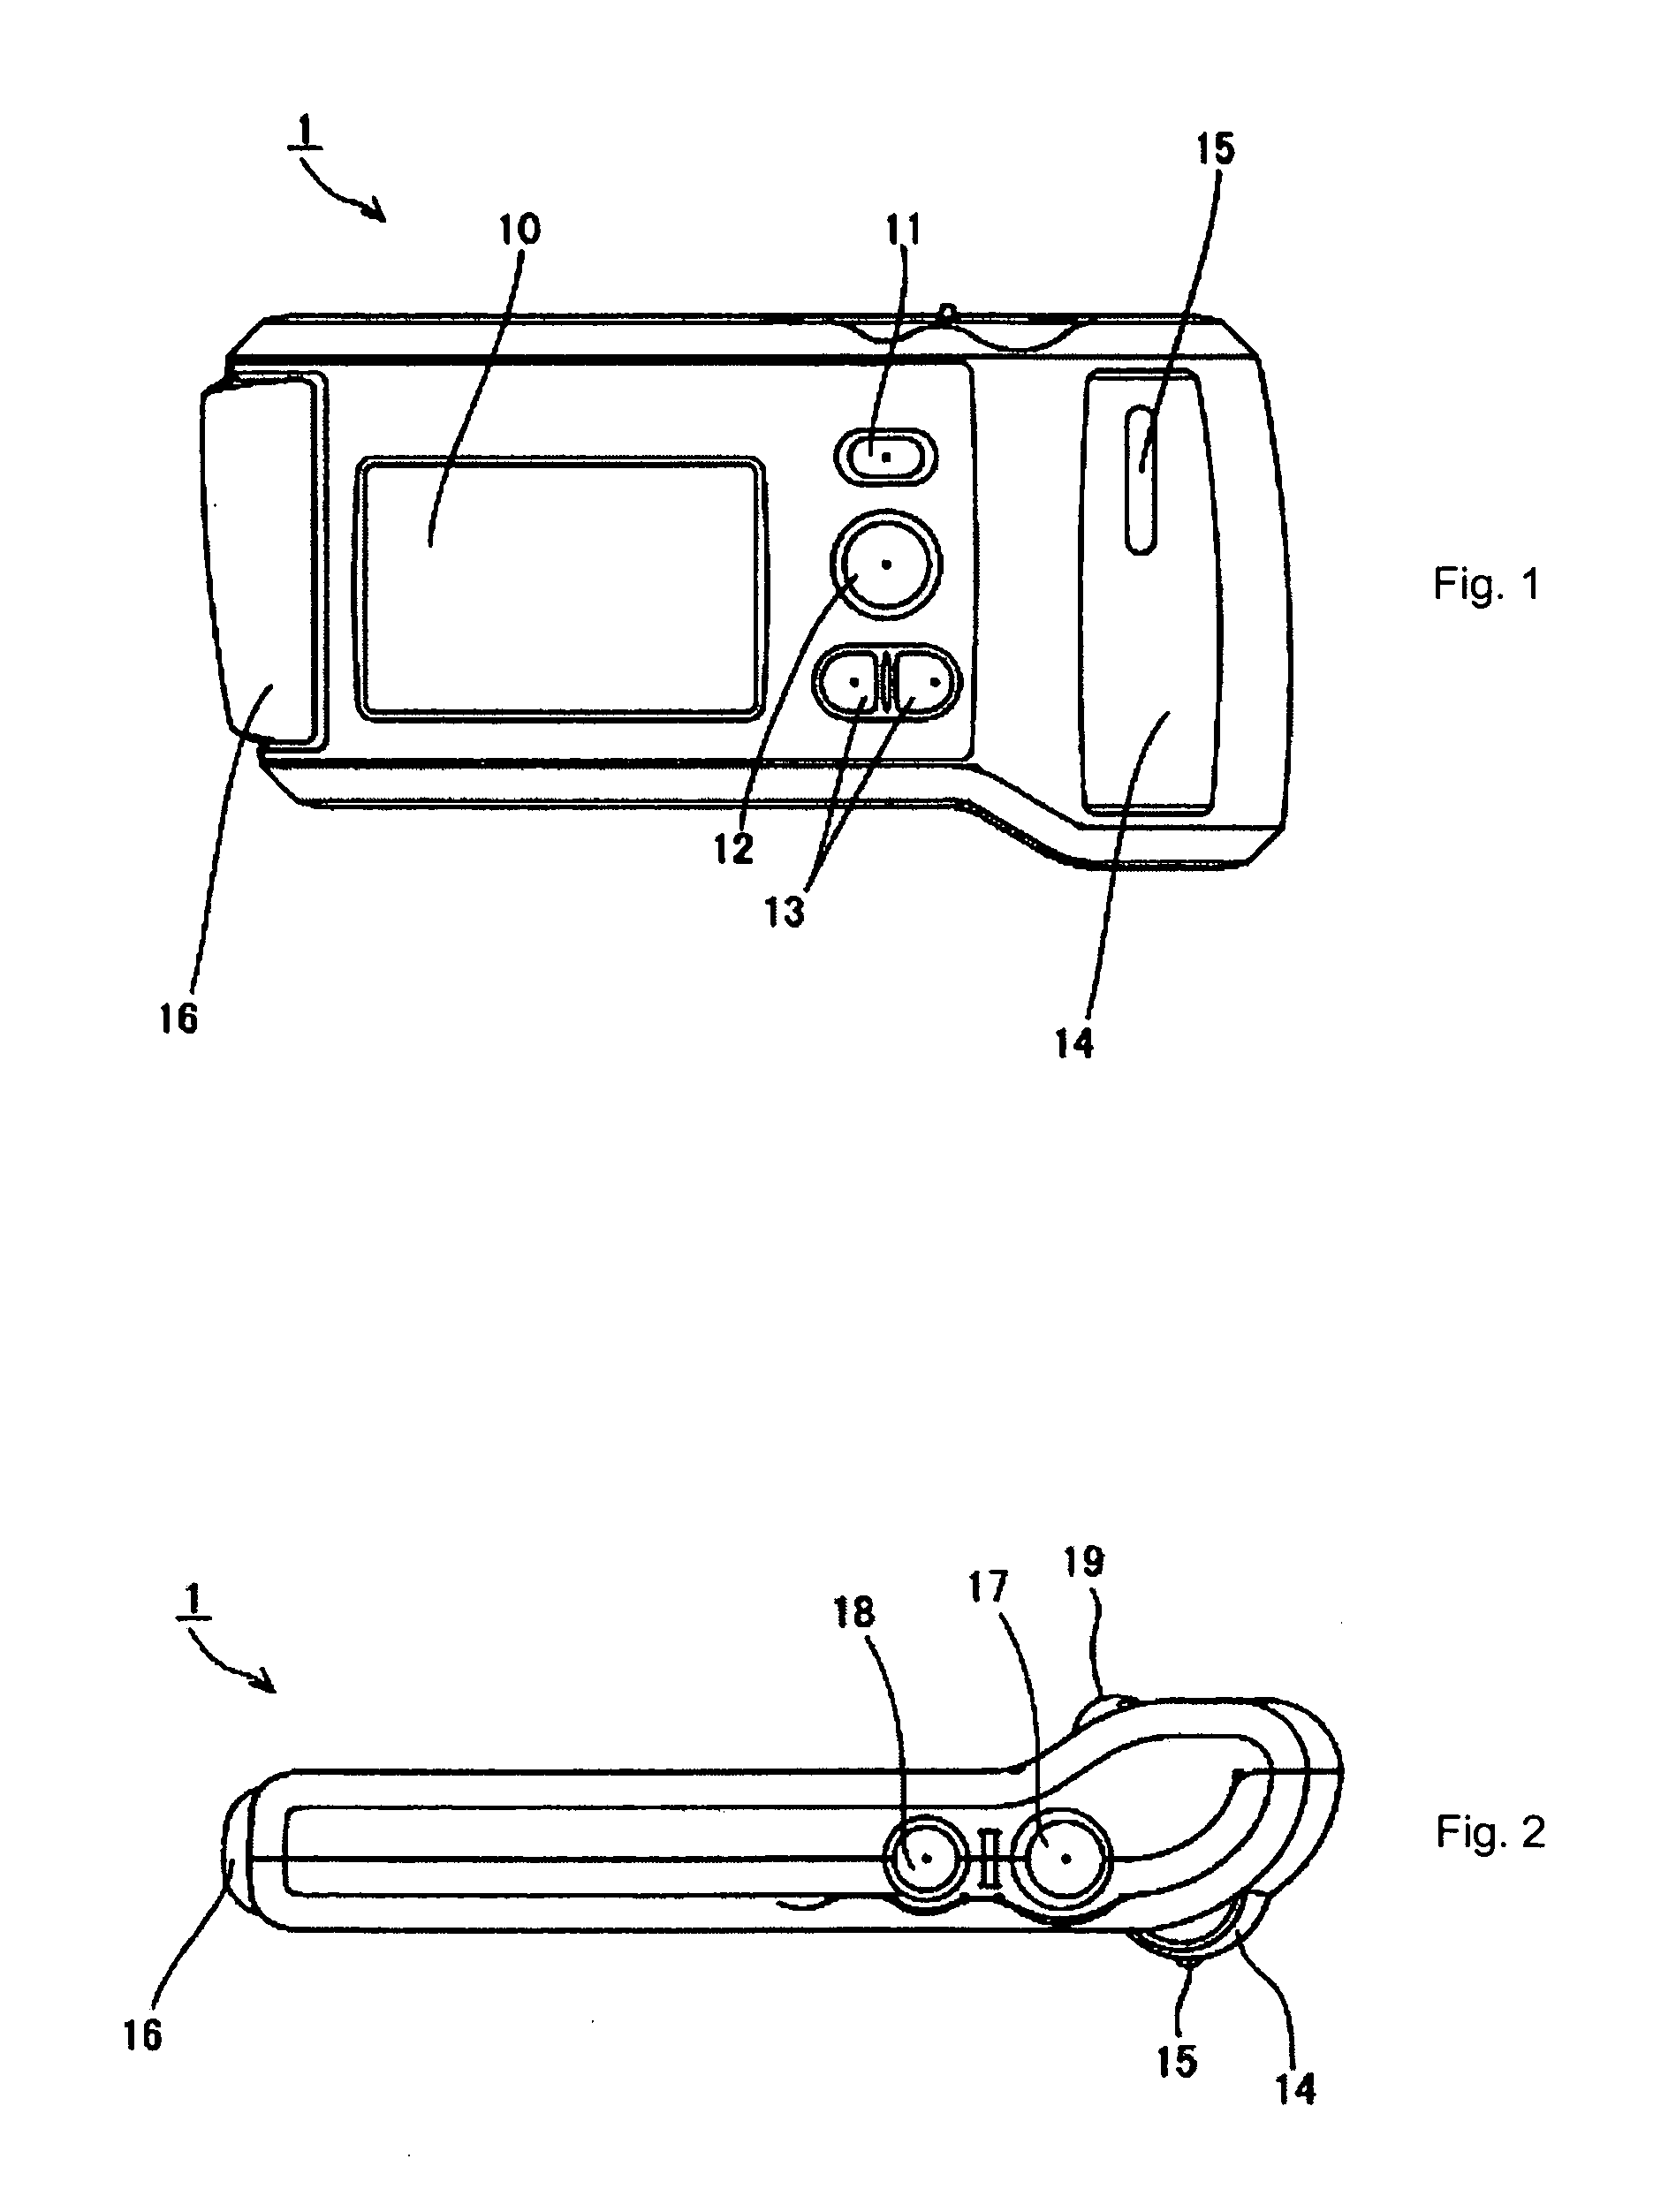 Electrocardiograph and display method for electrocardiograph